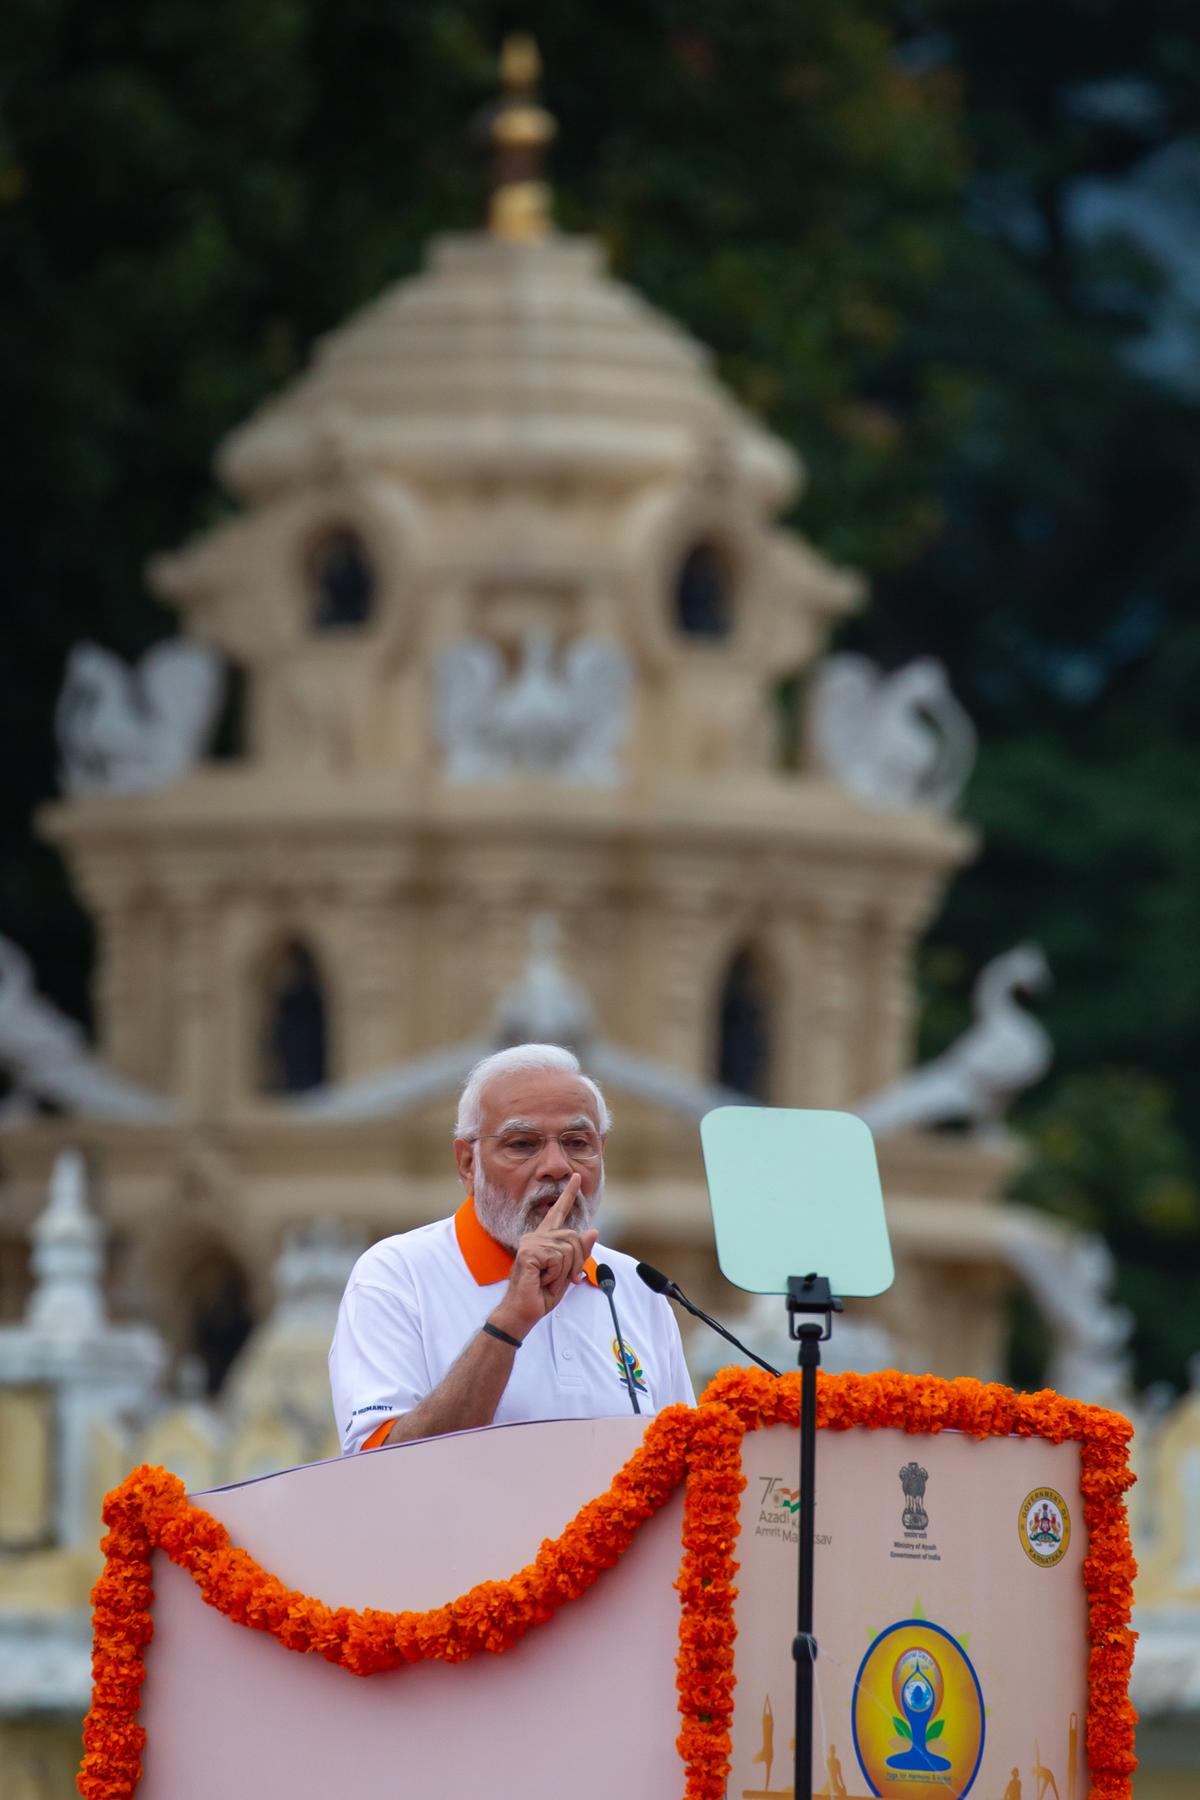 Prime Minister Narendra Modi addresses a gathering in front of the Mysore Palace during the International Day of Yoga celebrations, on June 21, 2022, in Mysuru, India.